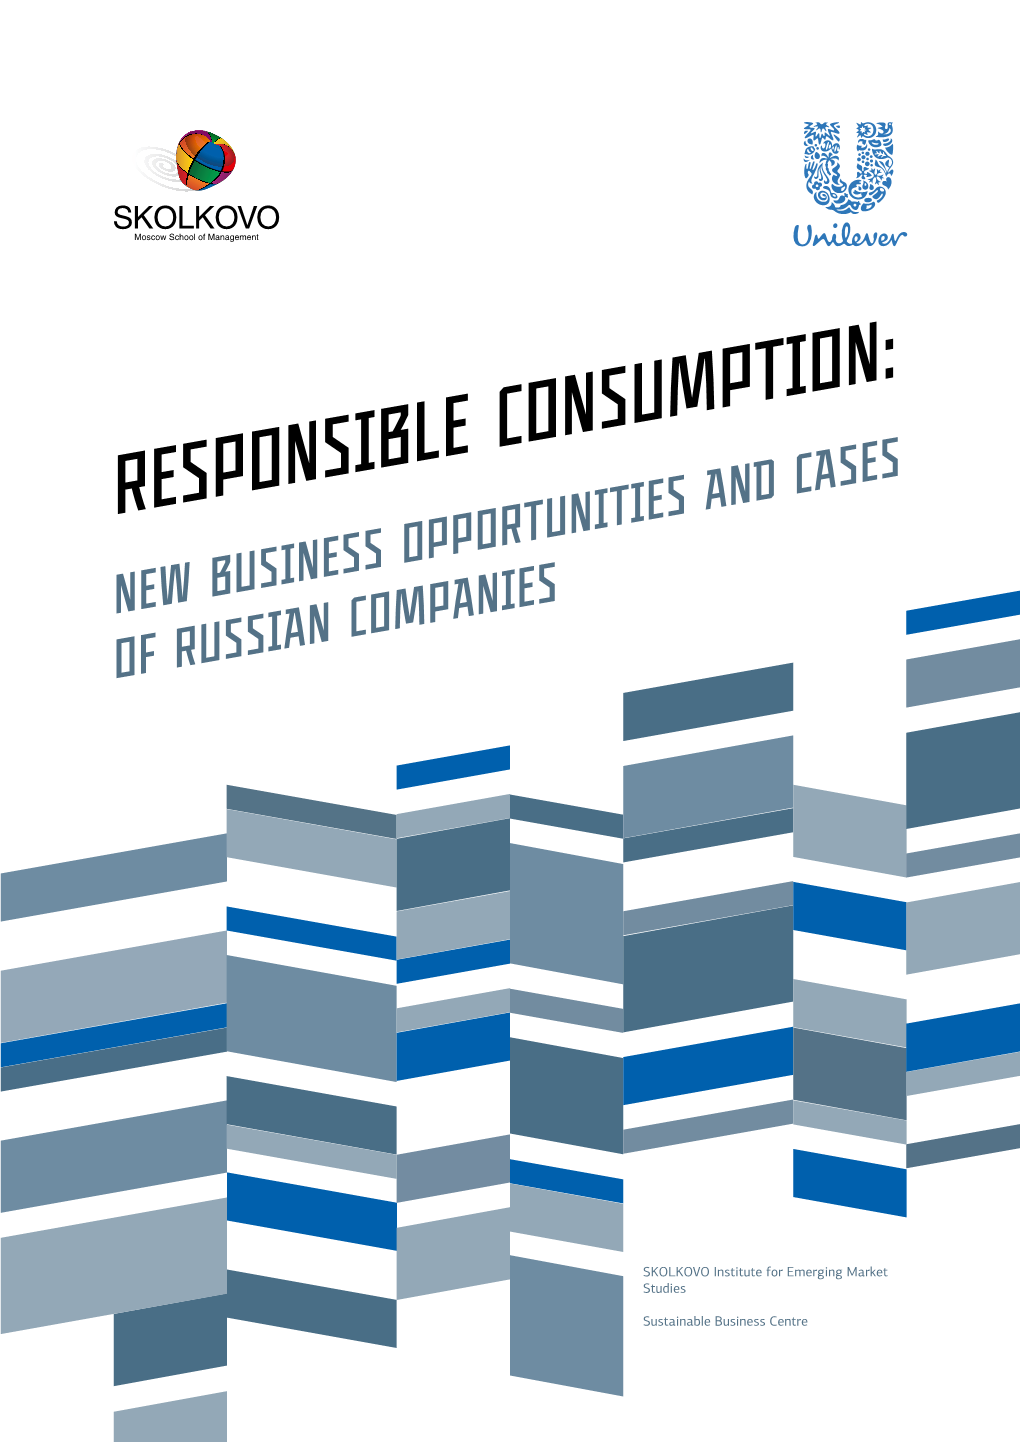 Responsible Consumption: New Business Opportunities and Cases of Russian Companies